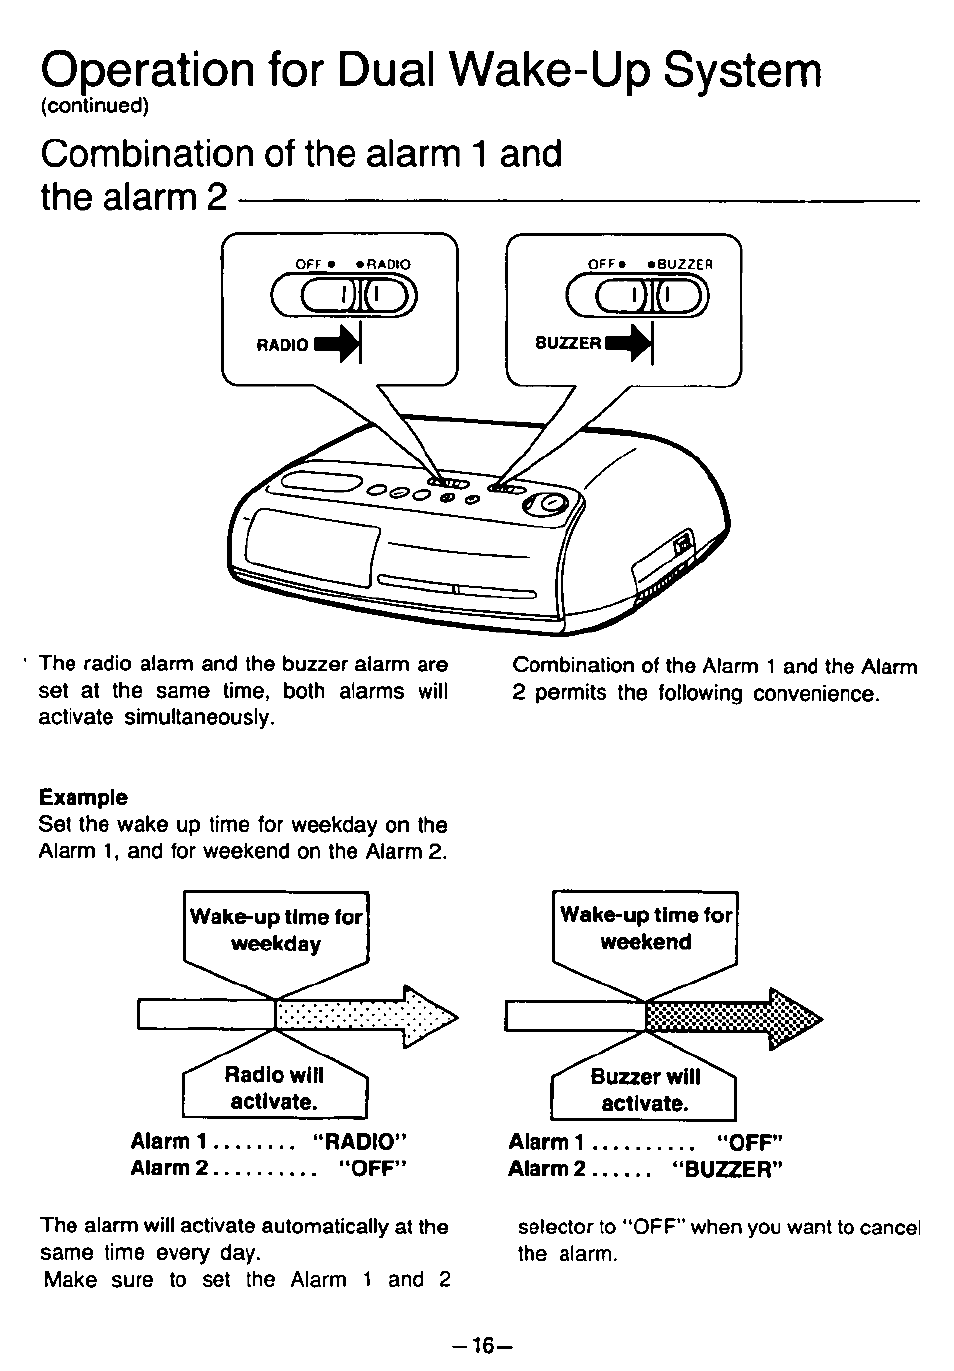 Operation for dual wake-up system, Combination of the alarm 1 and the alarm 2 | Panasonic RC6099 User Manual | Page 16 / 20